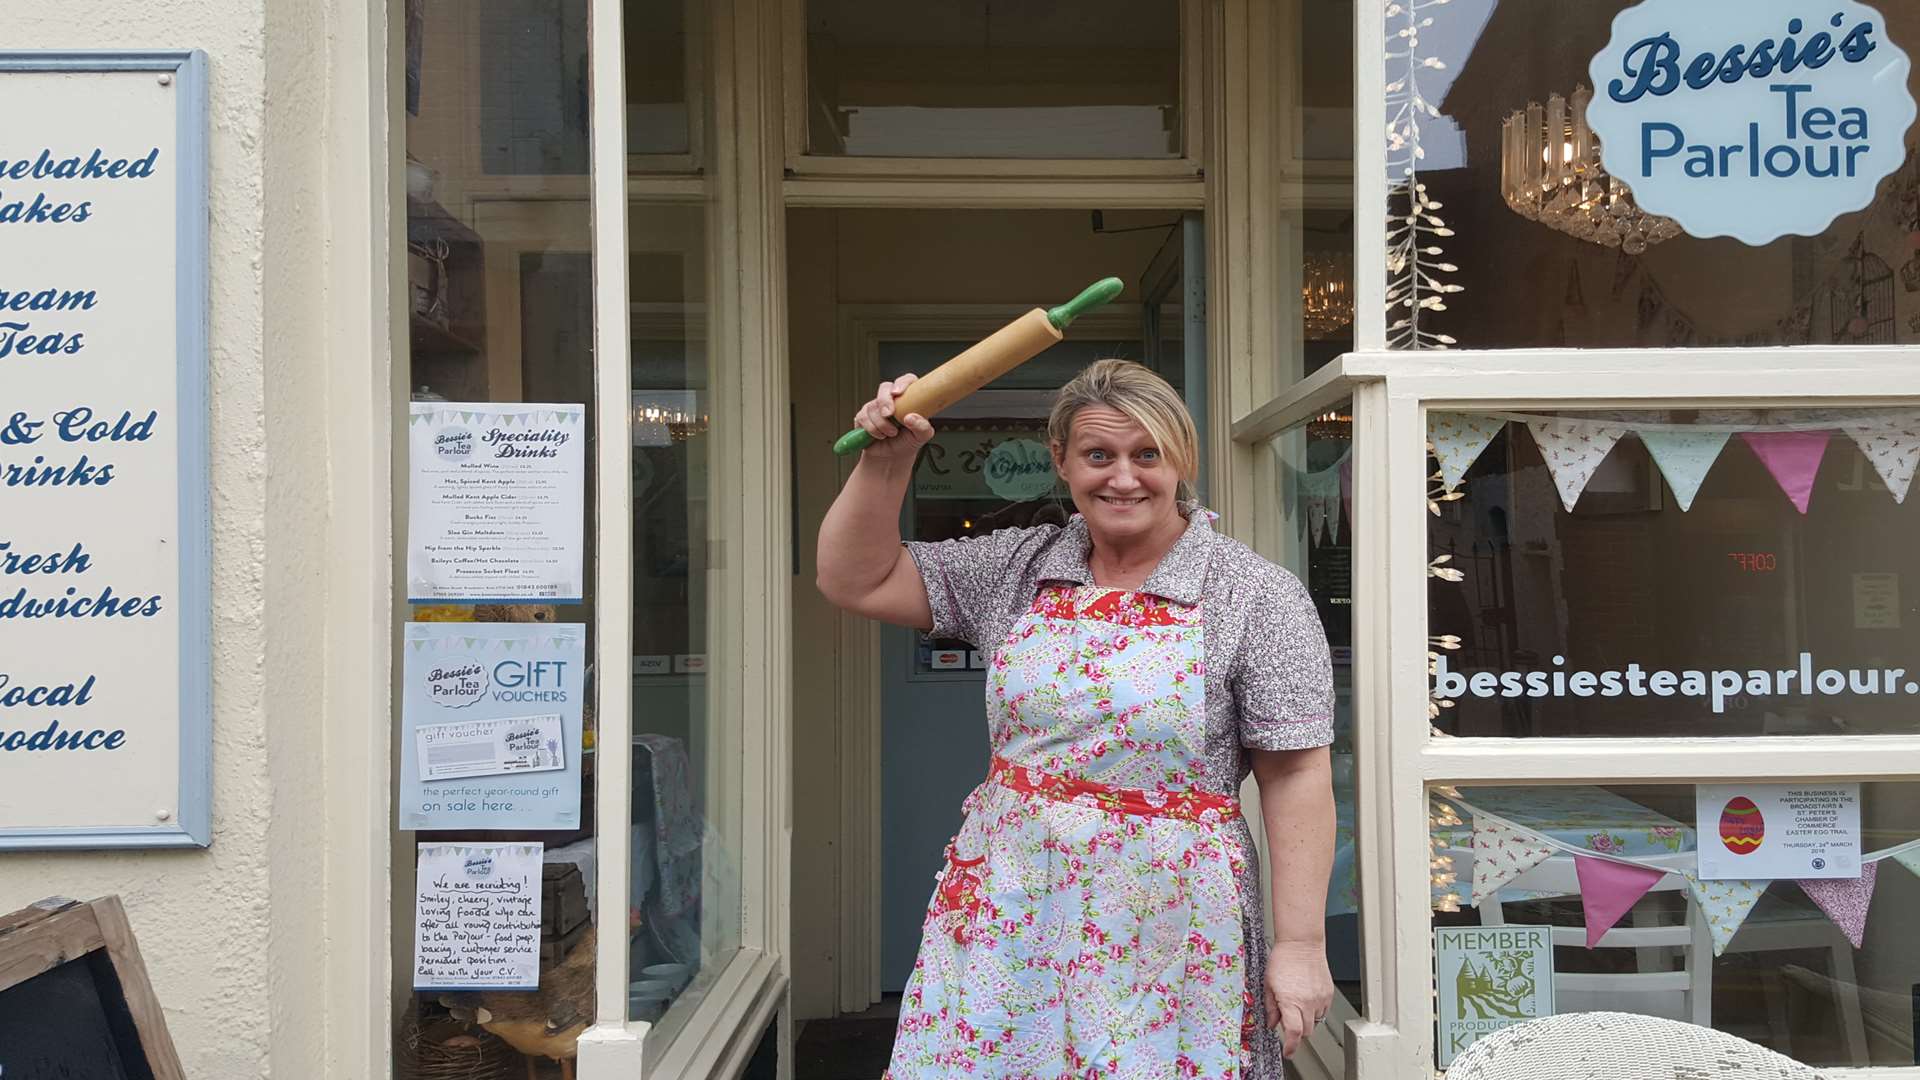 Karen Evans, 52, the proprietor of Bessie’s Tea Parlour in Albion Street, Broadstairs, was shocked when she arrived at work and caught the burglar red handed.